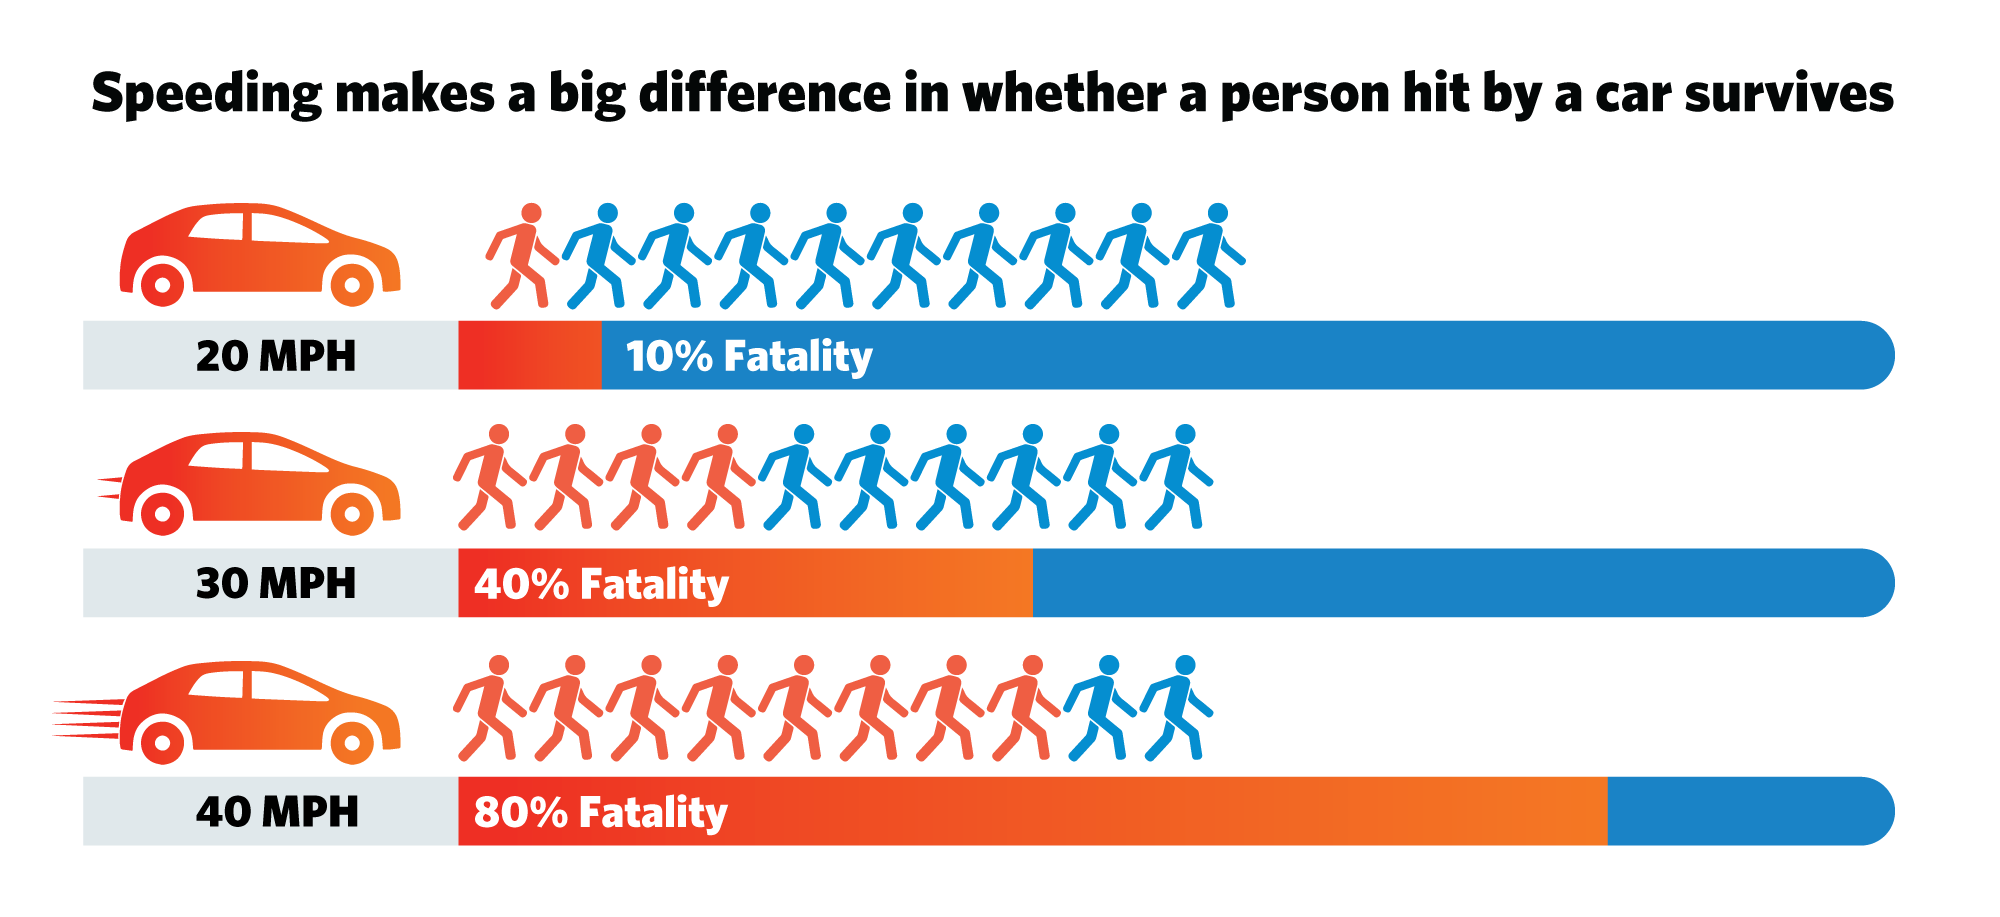 A person hit by a car going 20 miles per hour has a 10 percent of fatality, a person hit by a car going 30 miles per hour has a 40 percent chance of fatality, and a person hit by a car going 40 miles per hour has an 80 percent chance of fatality. 